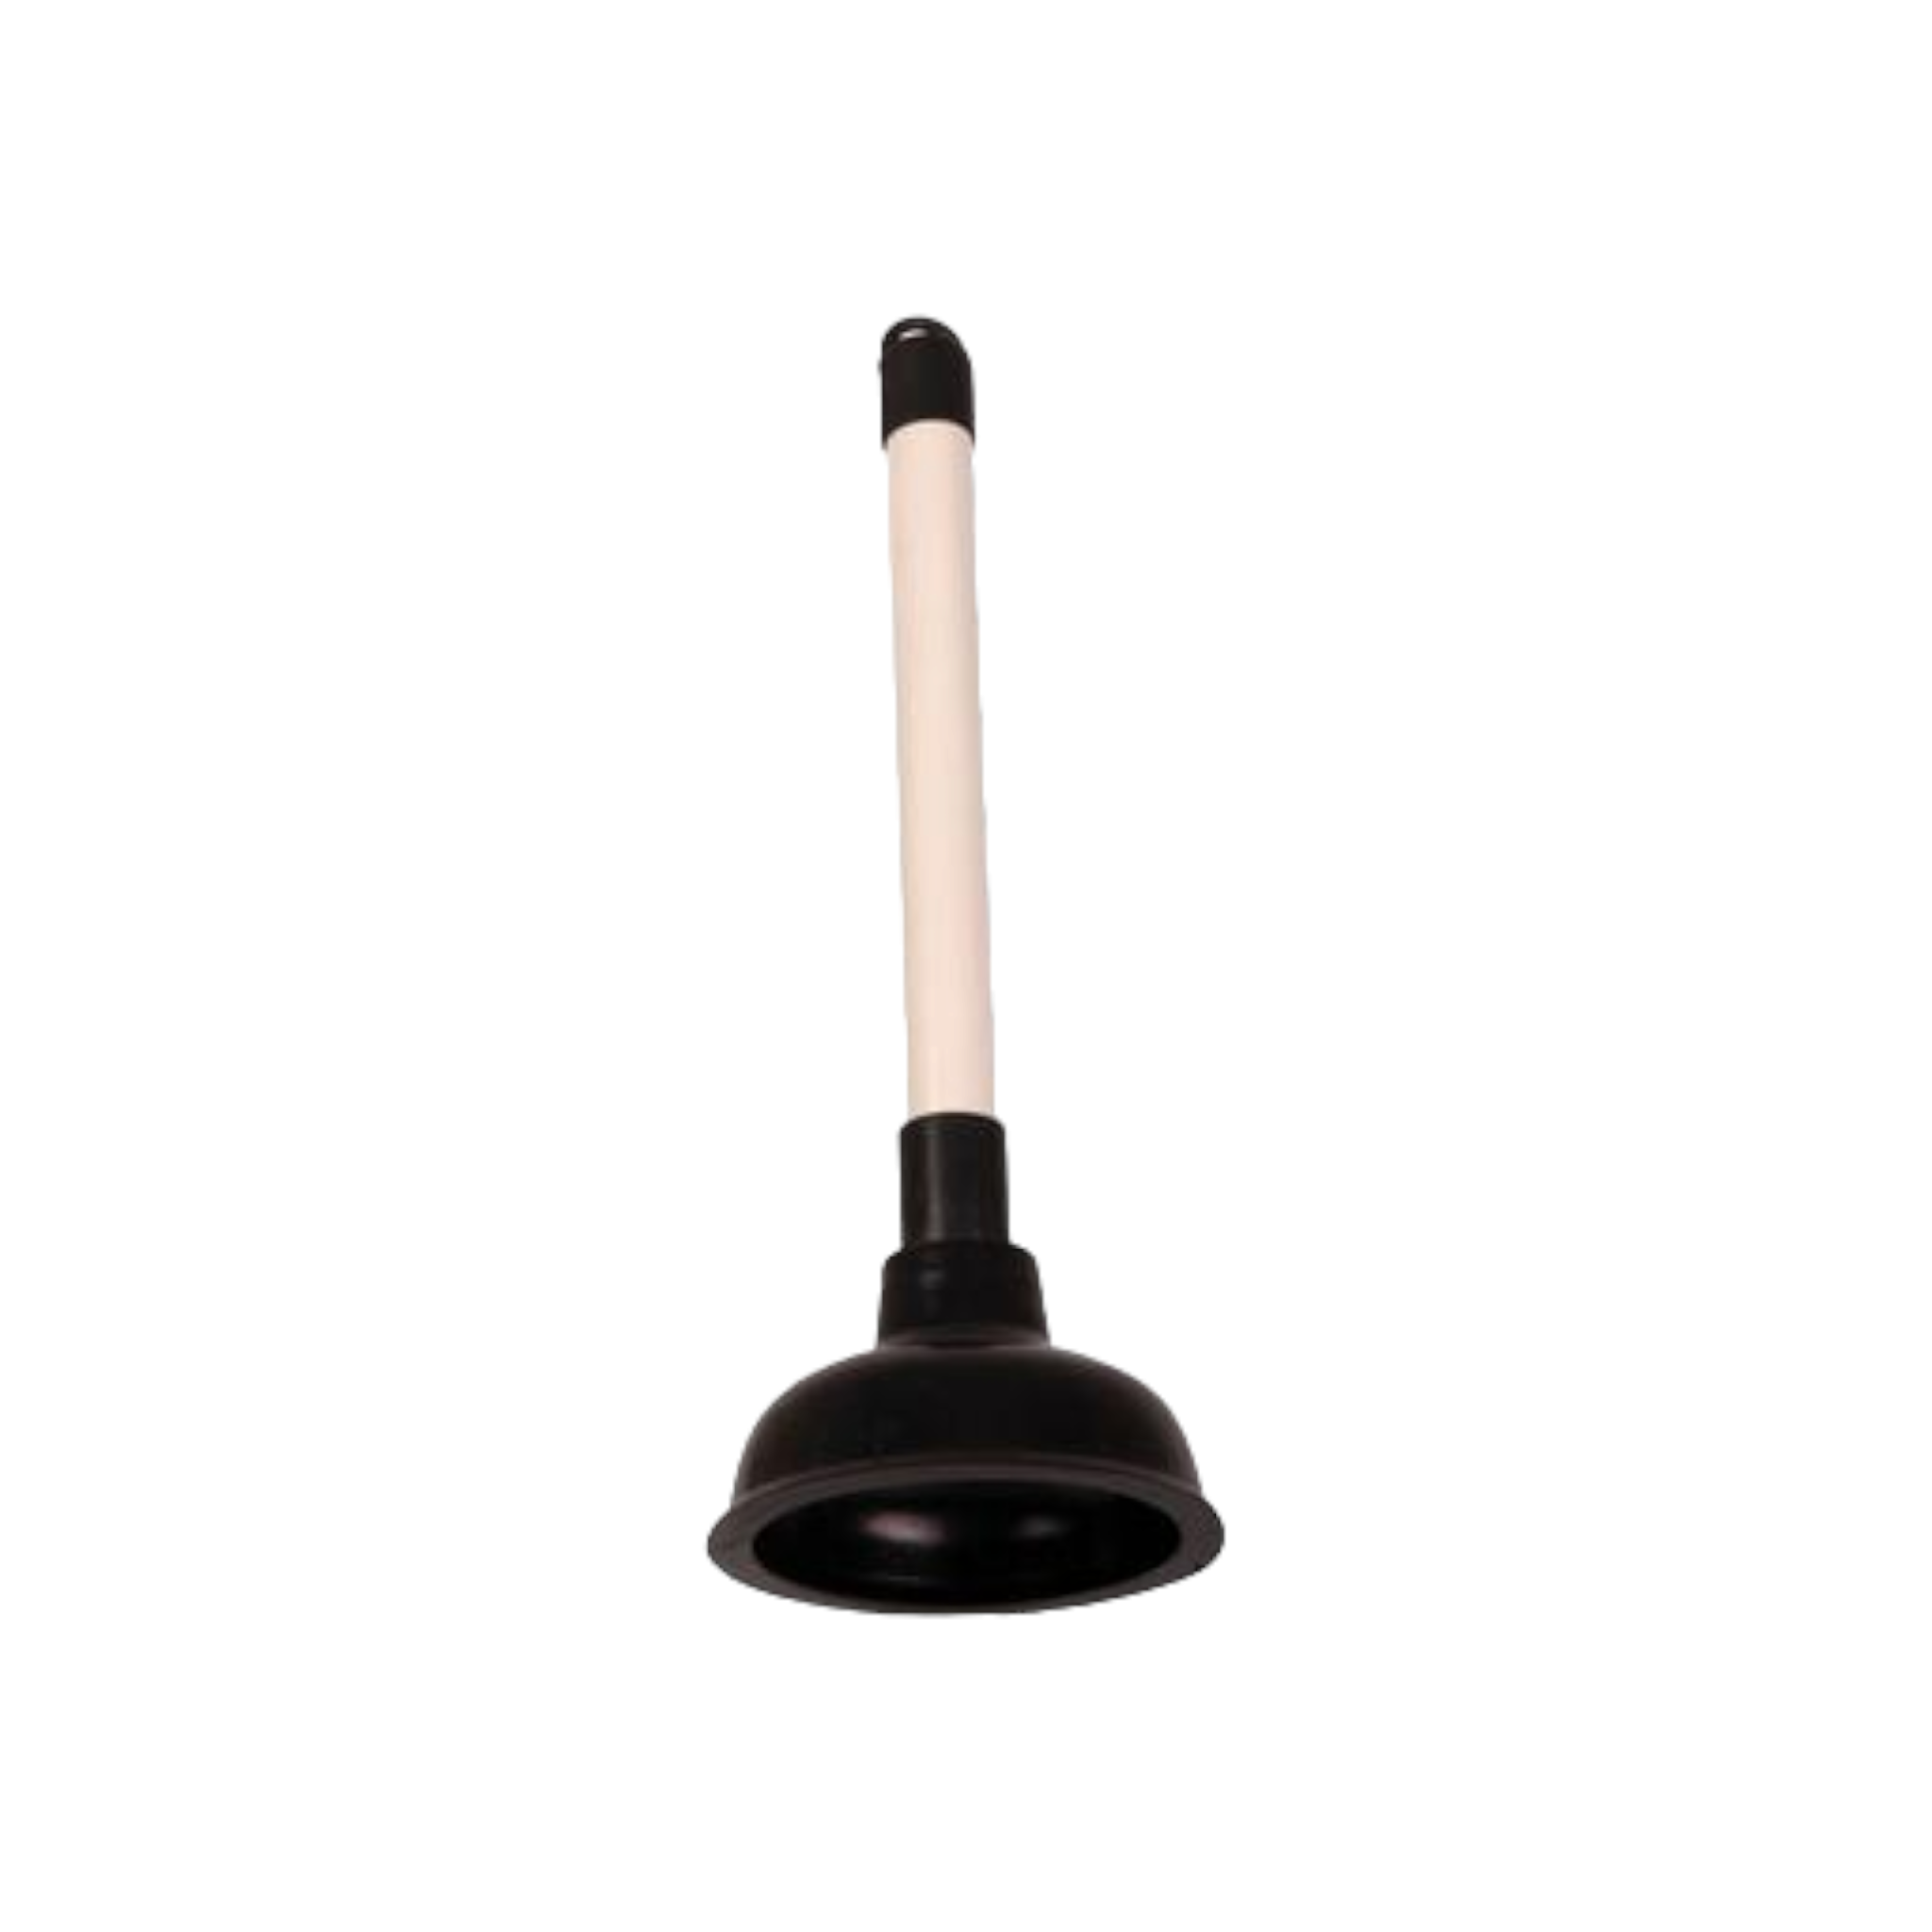 Force Cup Rubber Drain Plunger 100mmx225mm with Handle